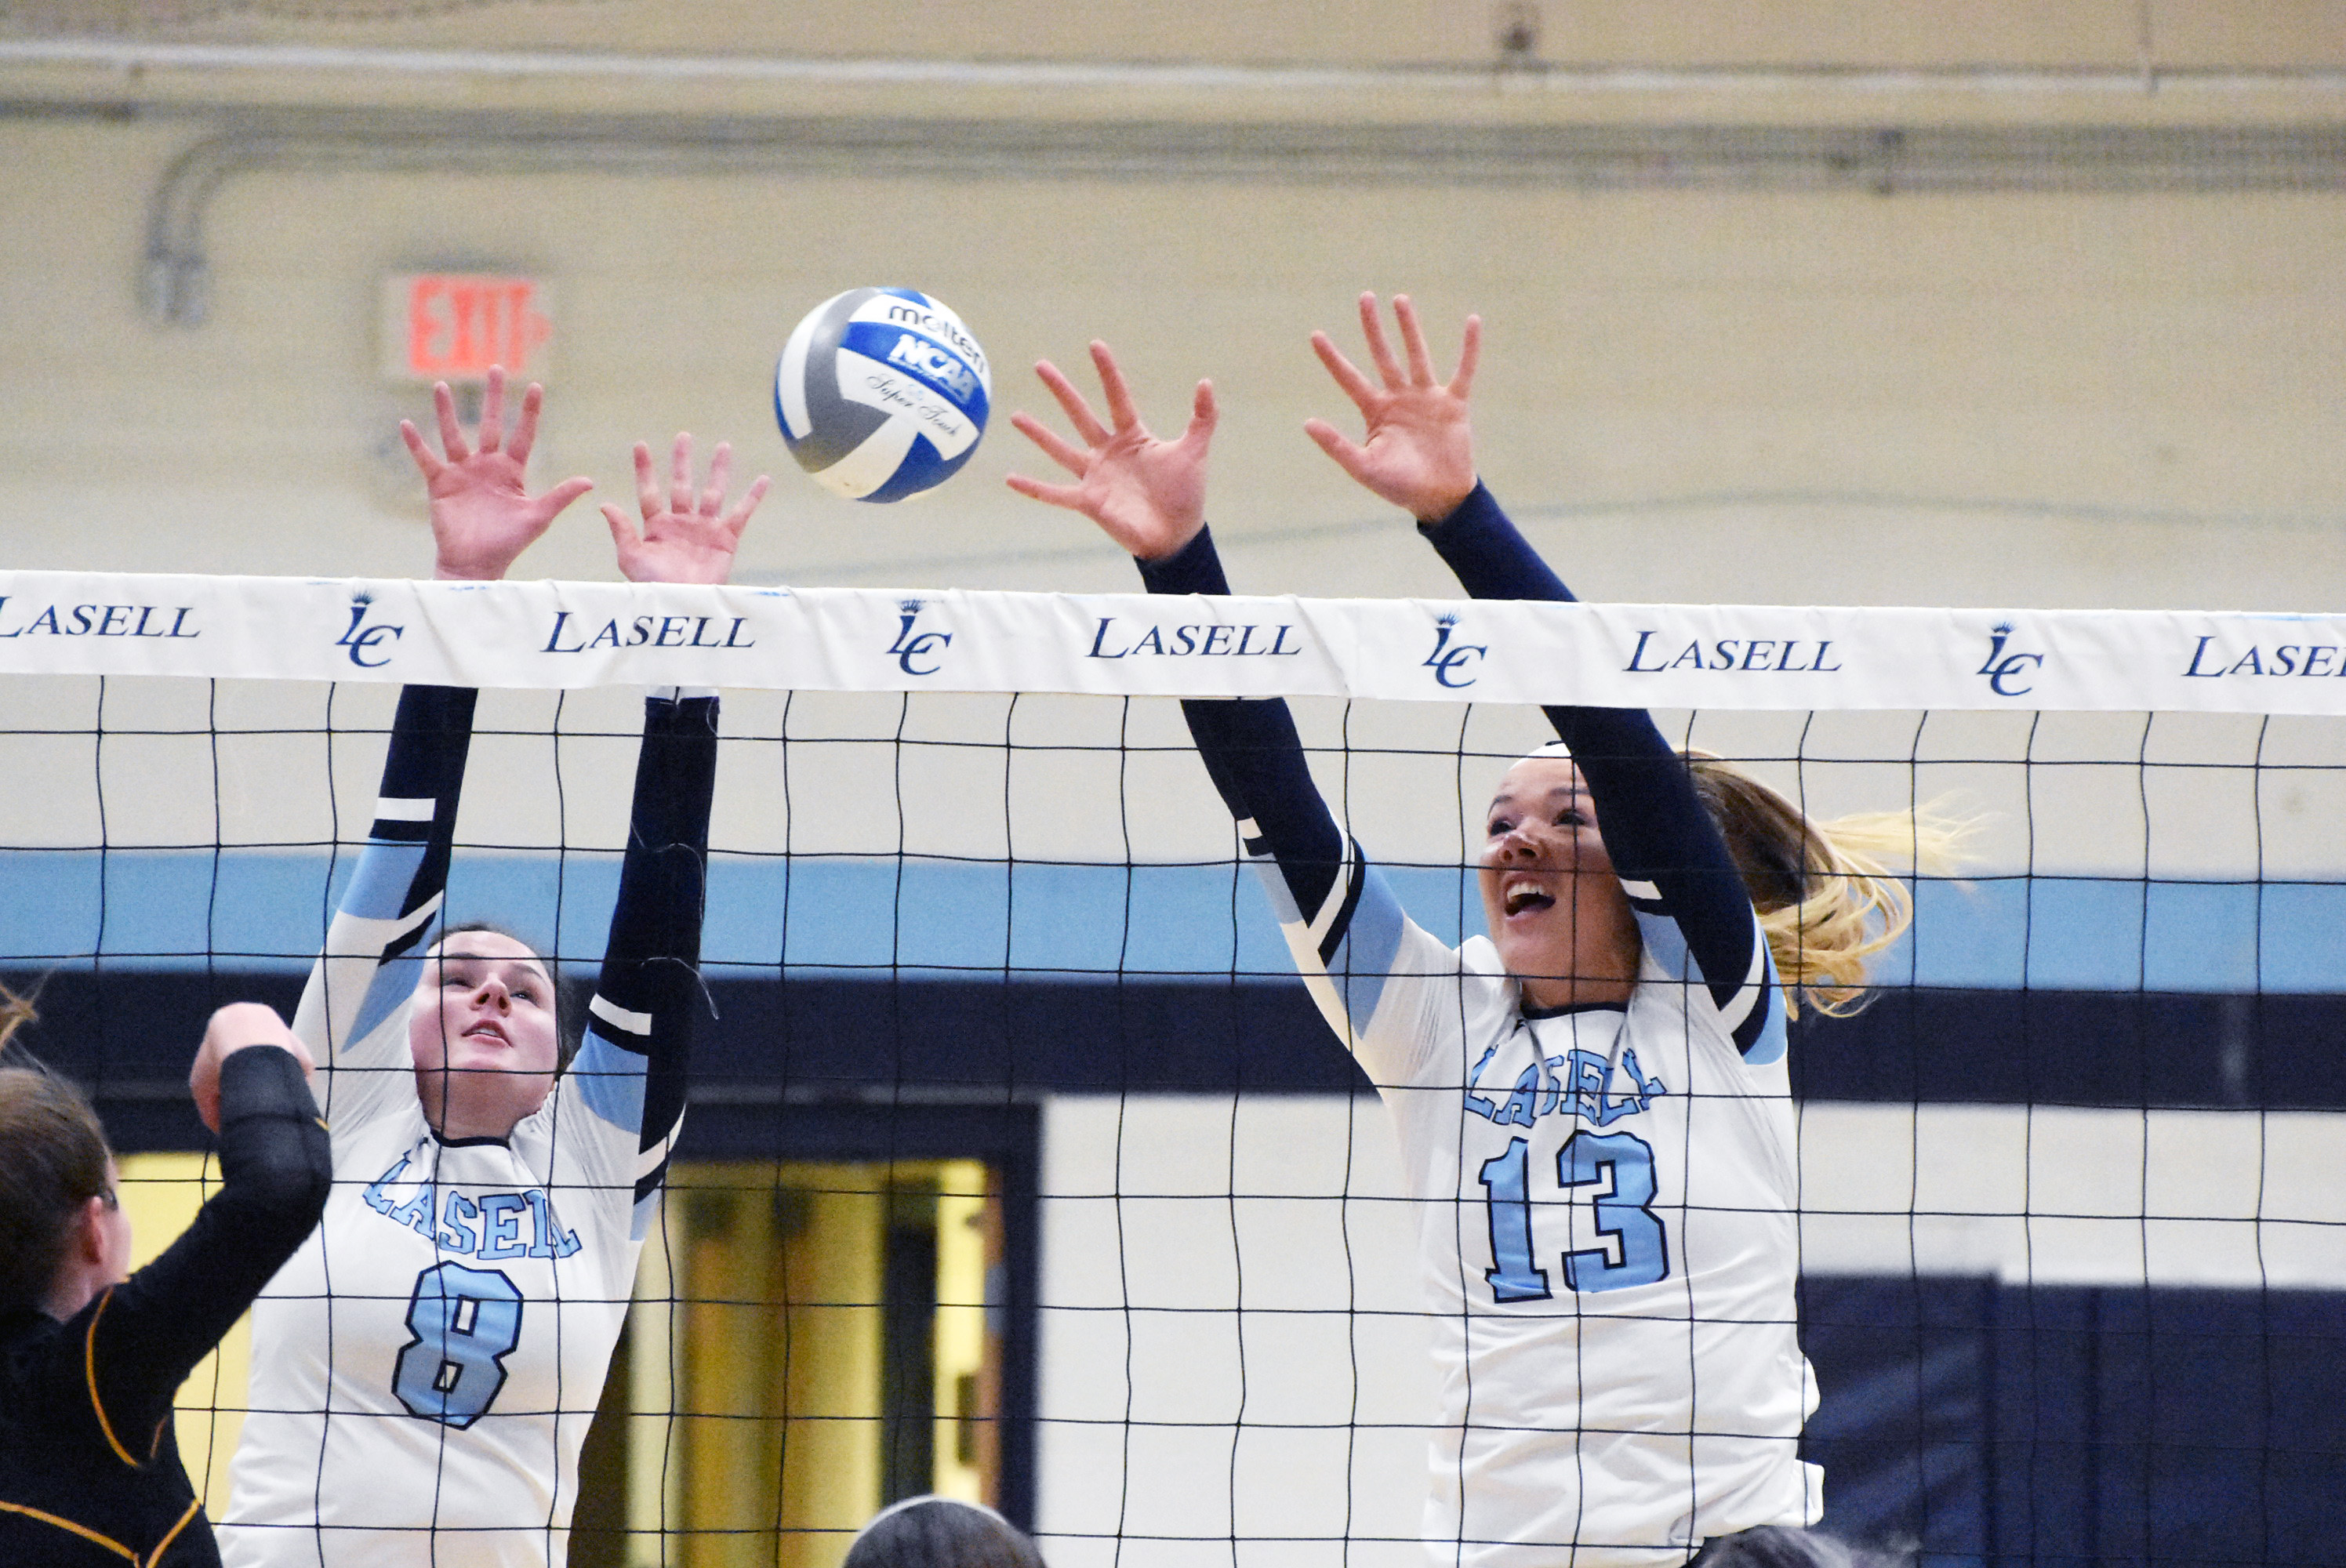 WVB: Lasell drops non-conference match to Framingham State; Perez Diaz records 19 kills